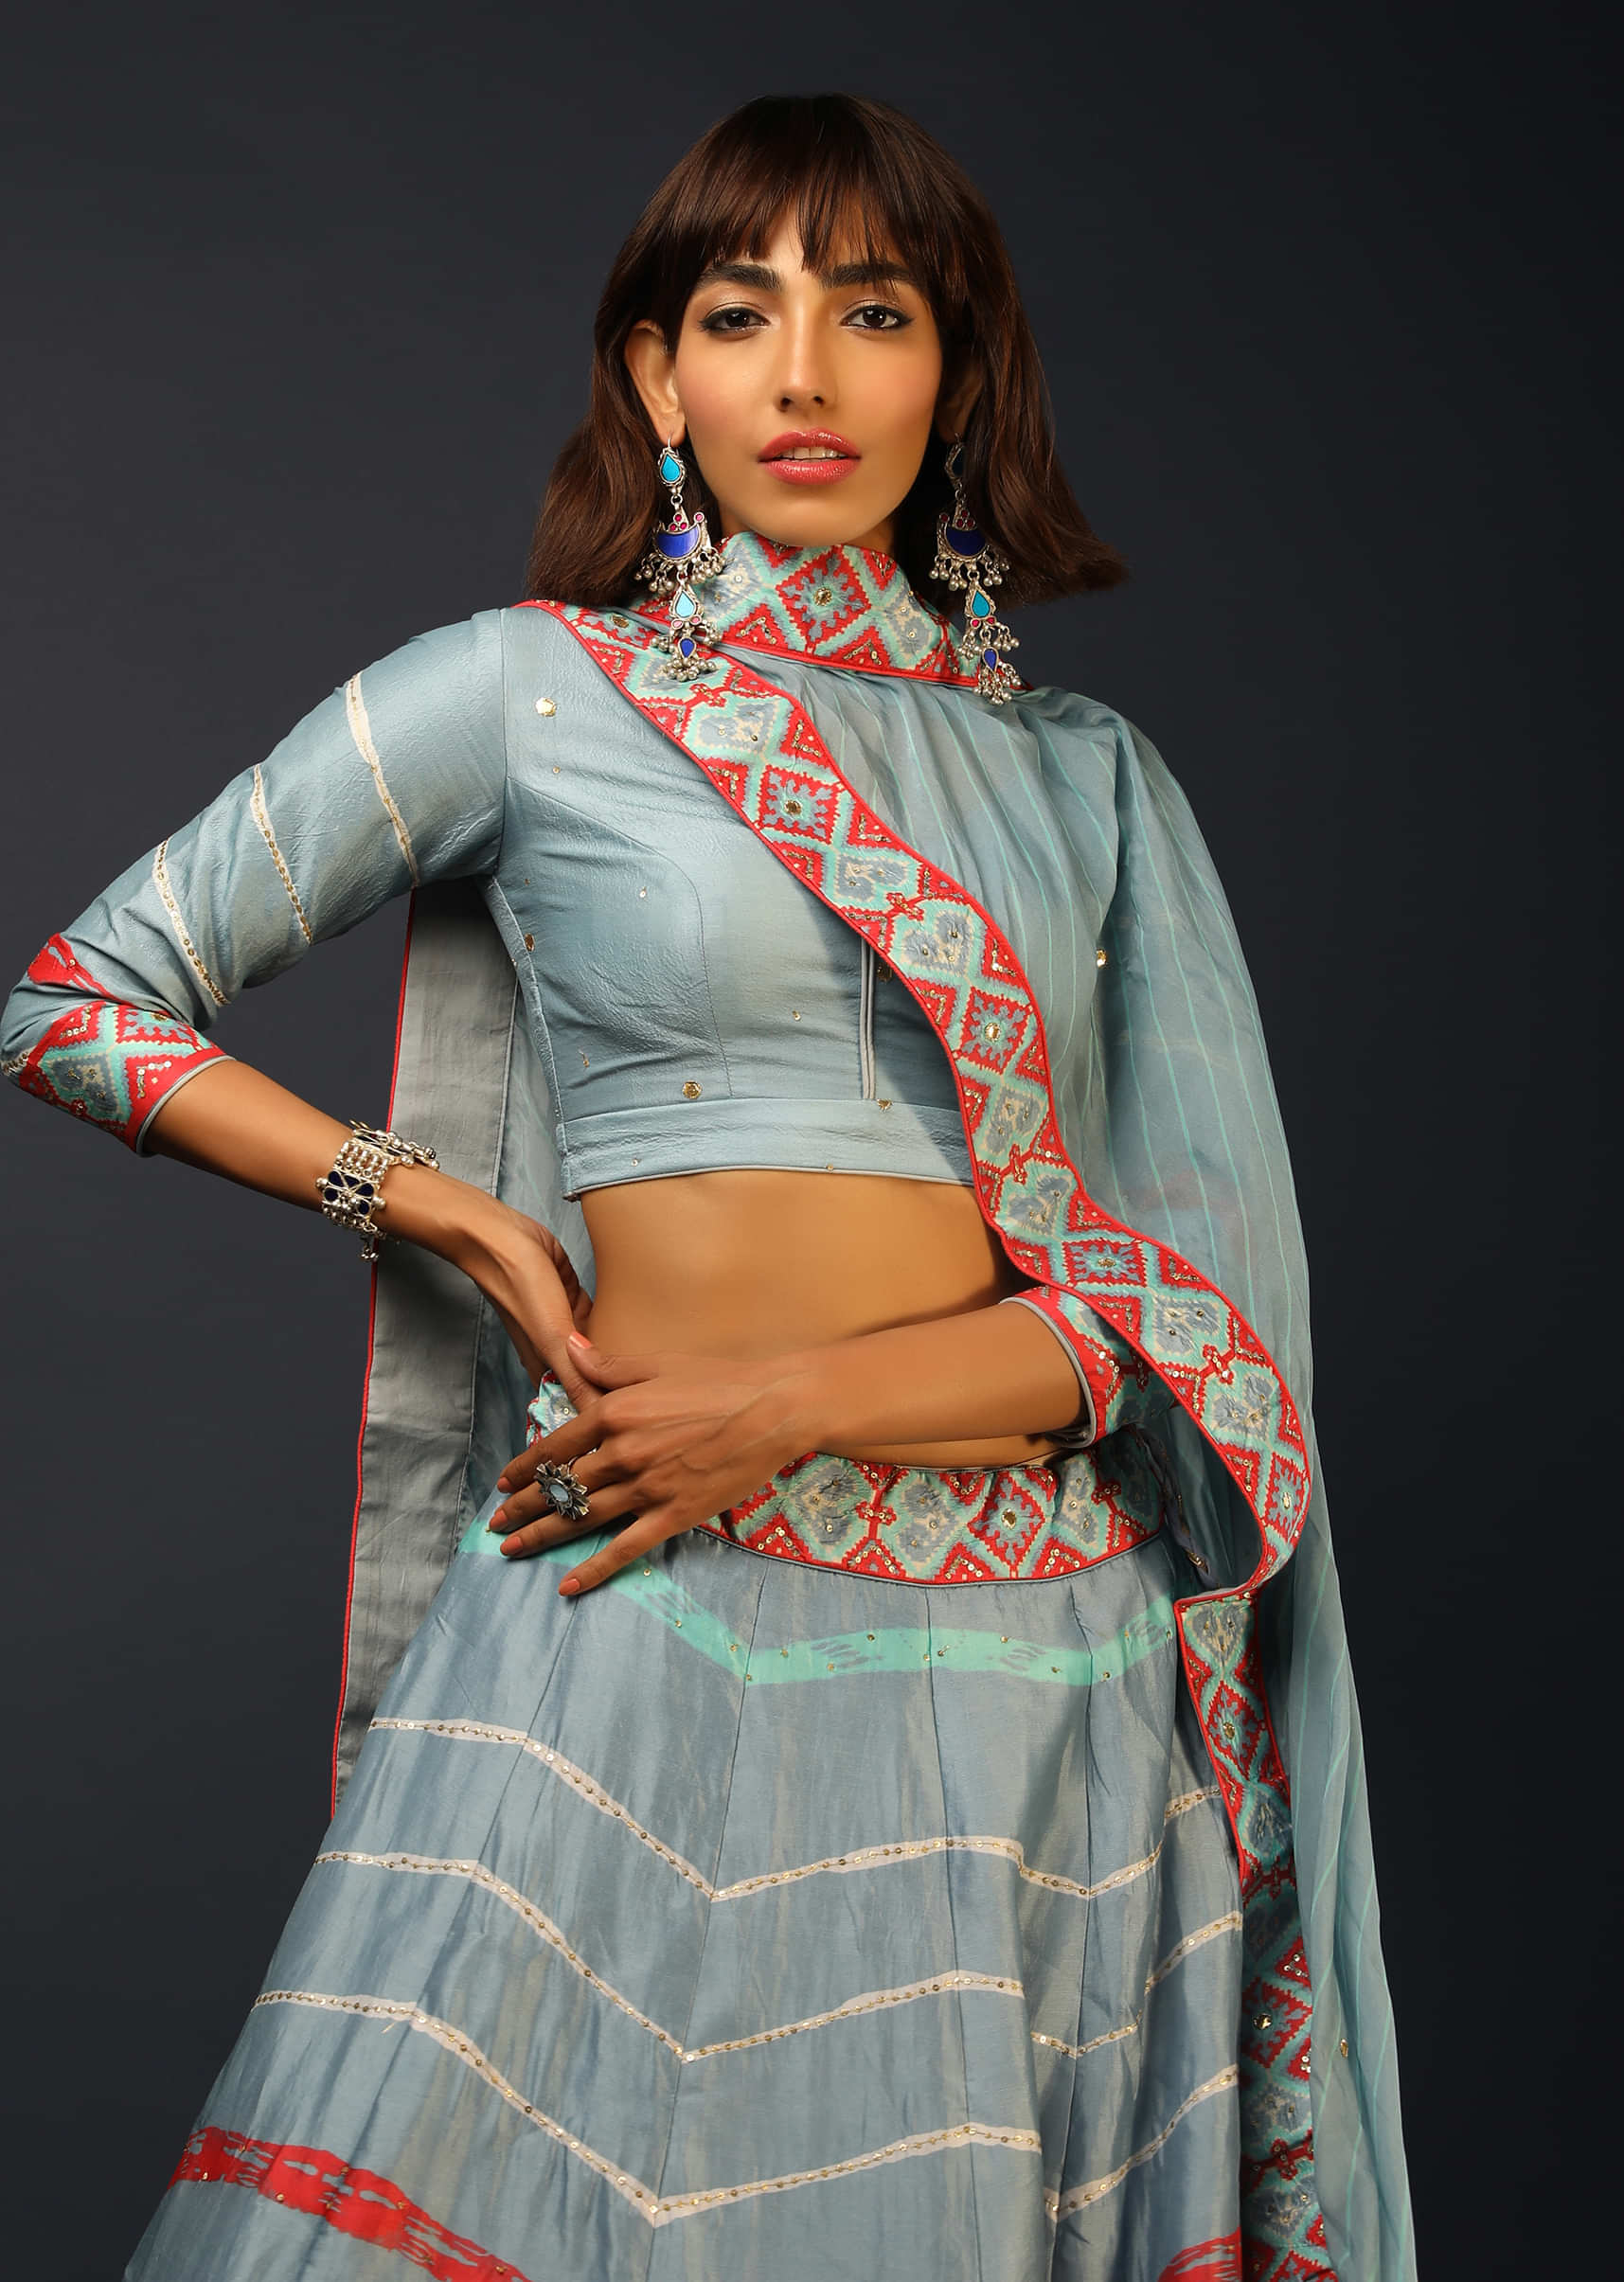 Blue Bell Lehenga In Silk With Tie Dye Printed Stripes And Multicolored Patola Border 